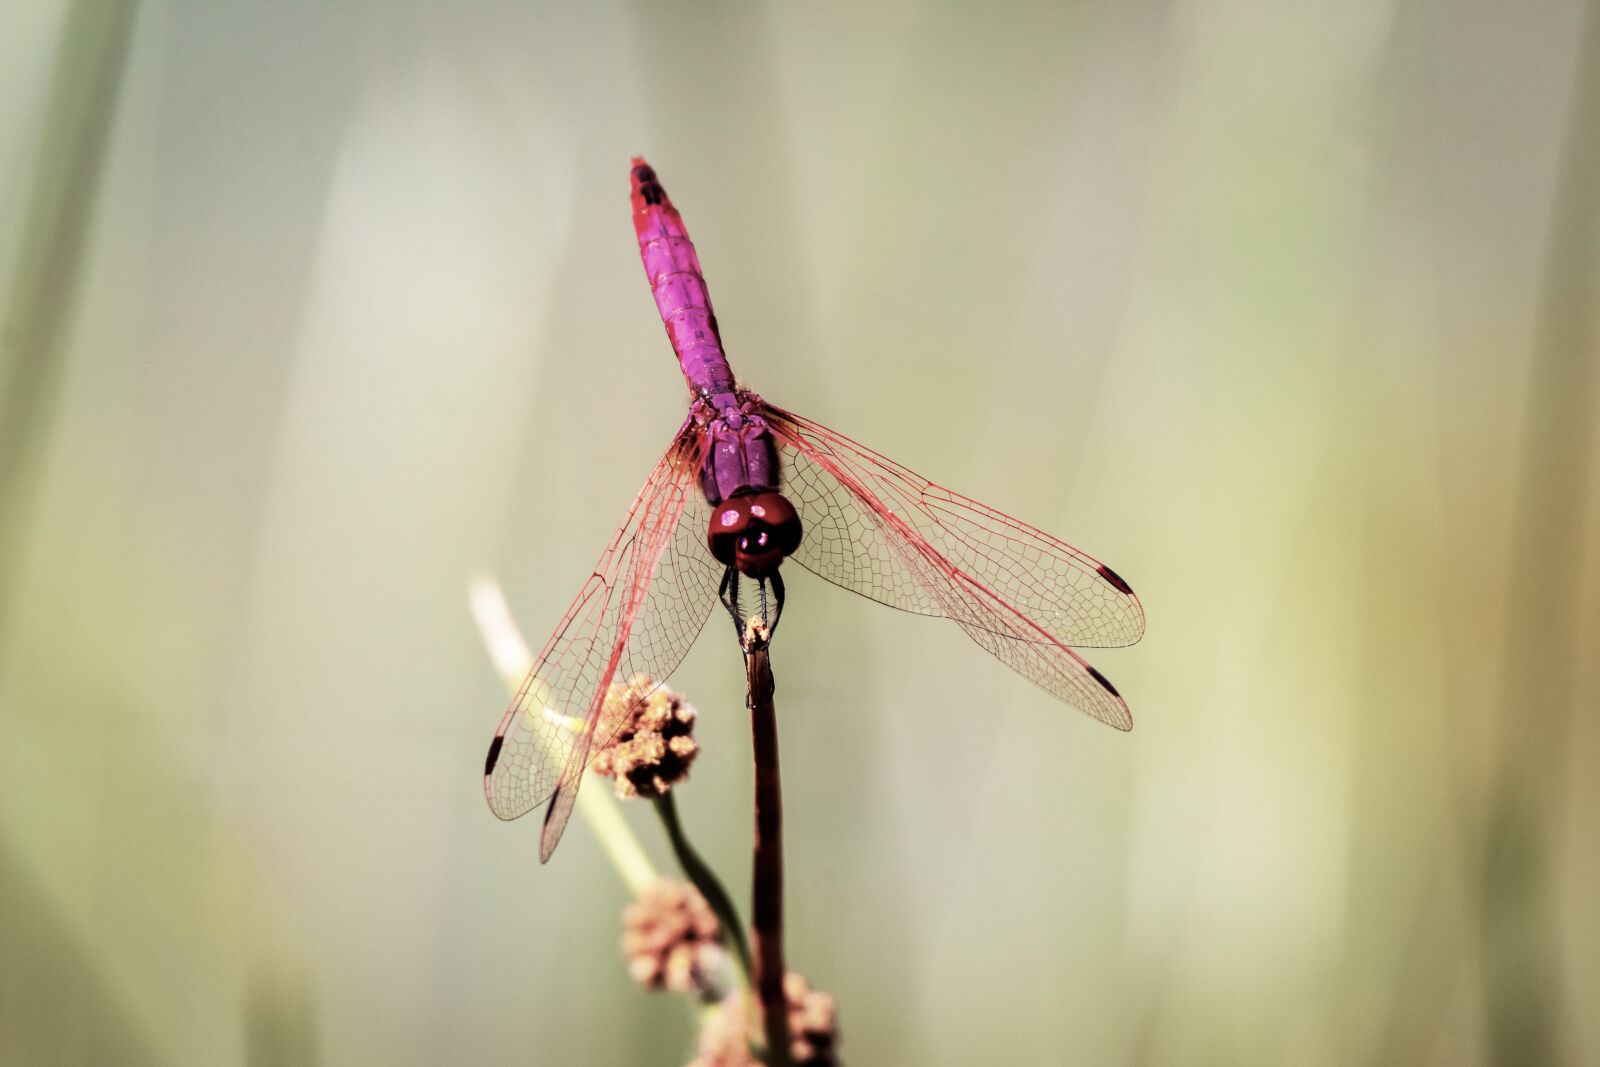 Tamron 100-400mm F4.5-6.3 Di VC USD sample photo. Dragonfly, insect, nature photography